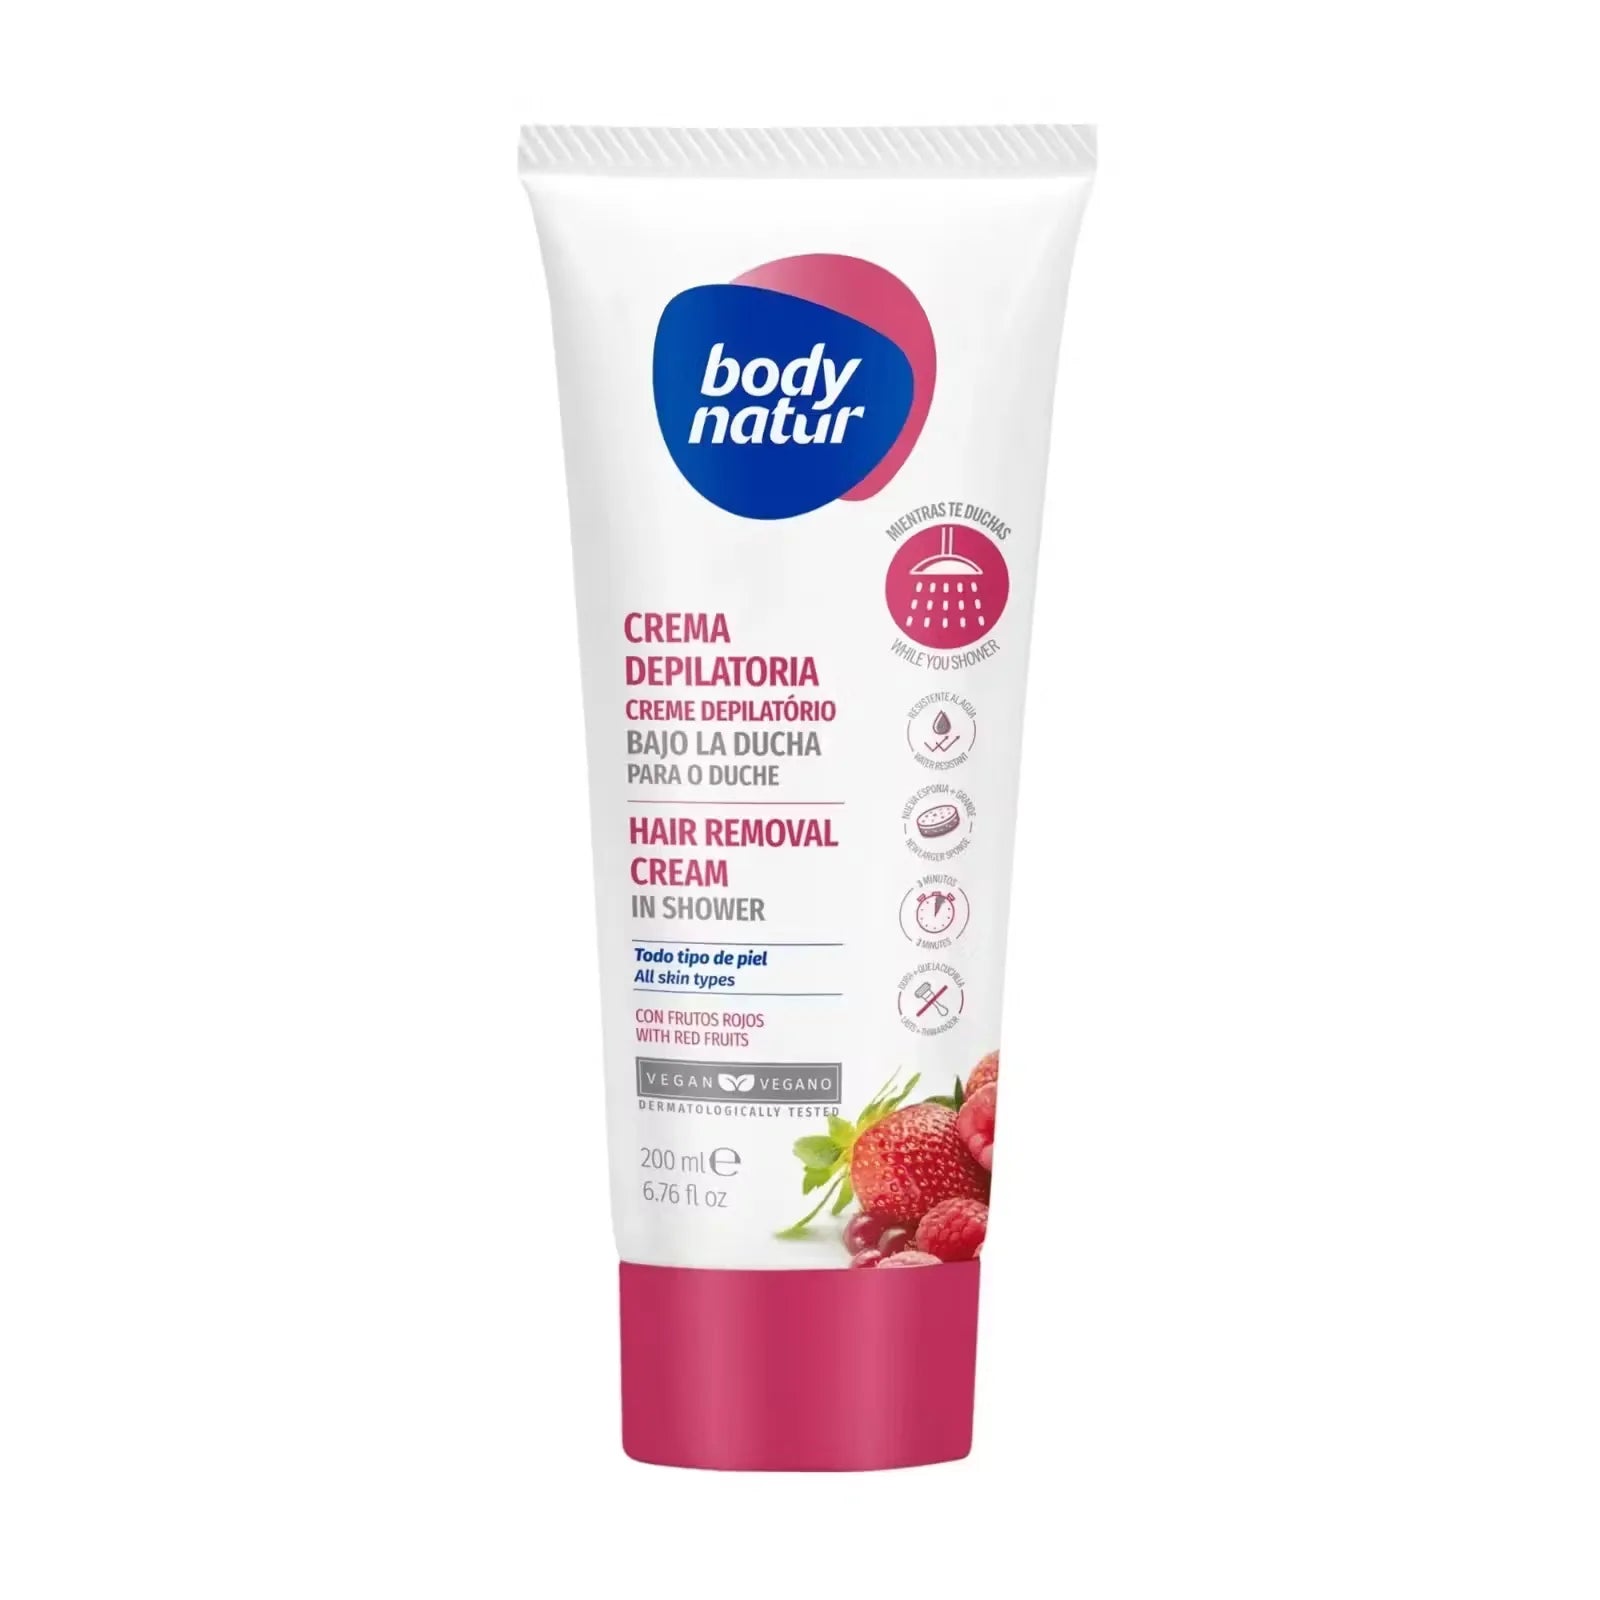 White tube of Body Natur Crema Hair Removal Cream (200ml) with pink accents and a woman's legs enjoying a shower in the background.